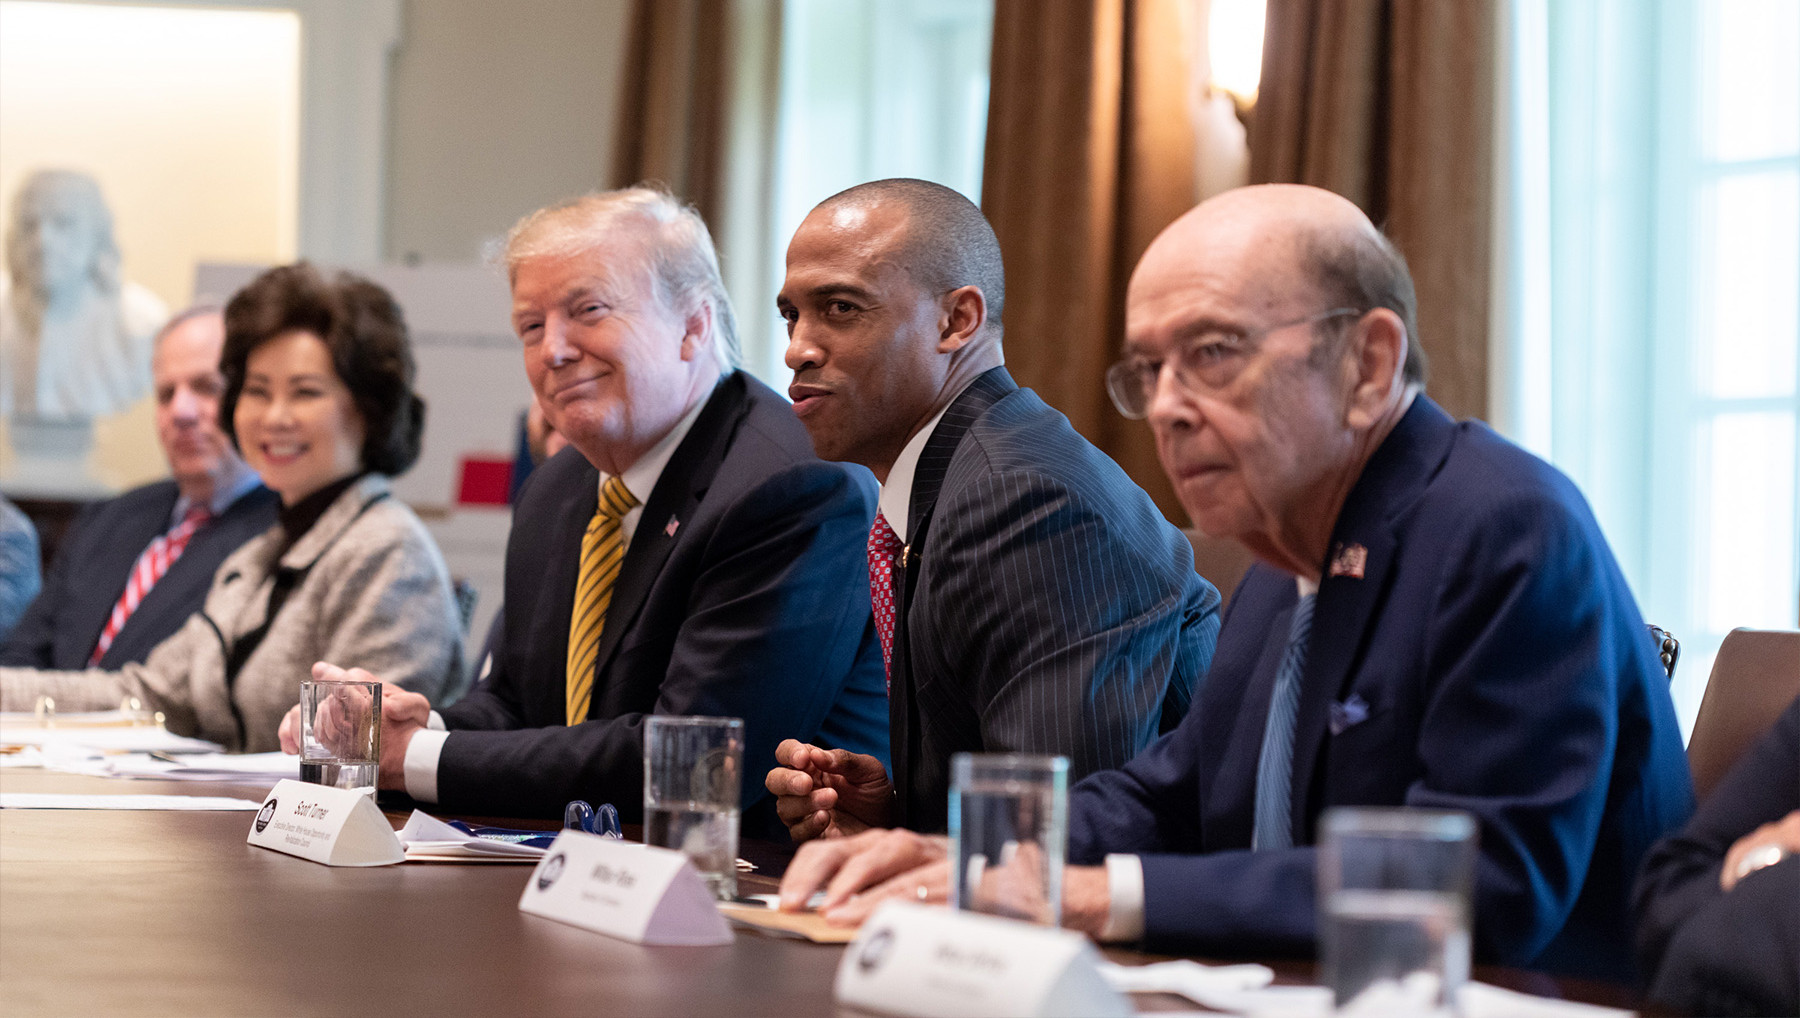 President Trump leads a meeting on Opportunity Zones